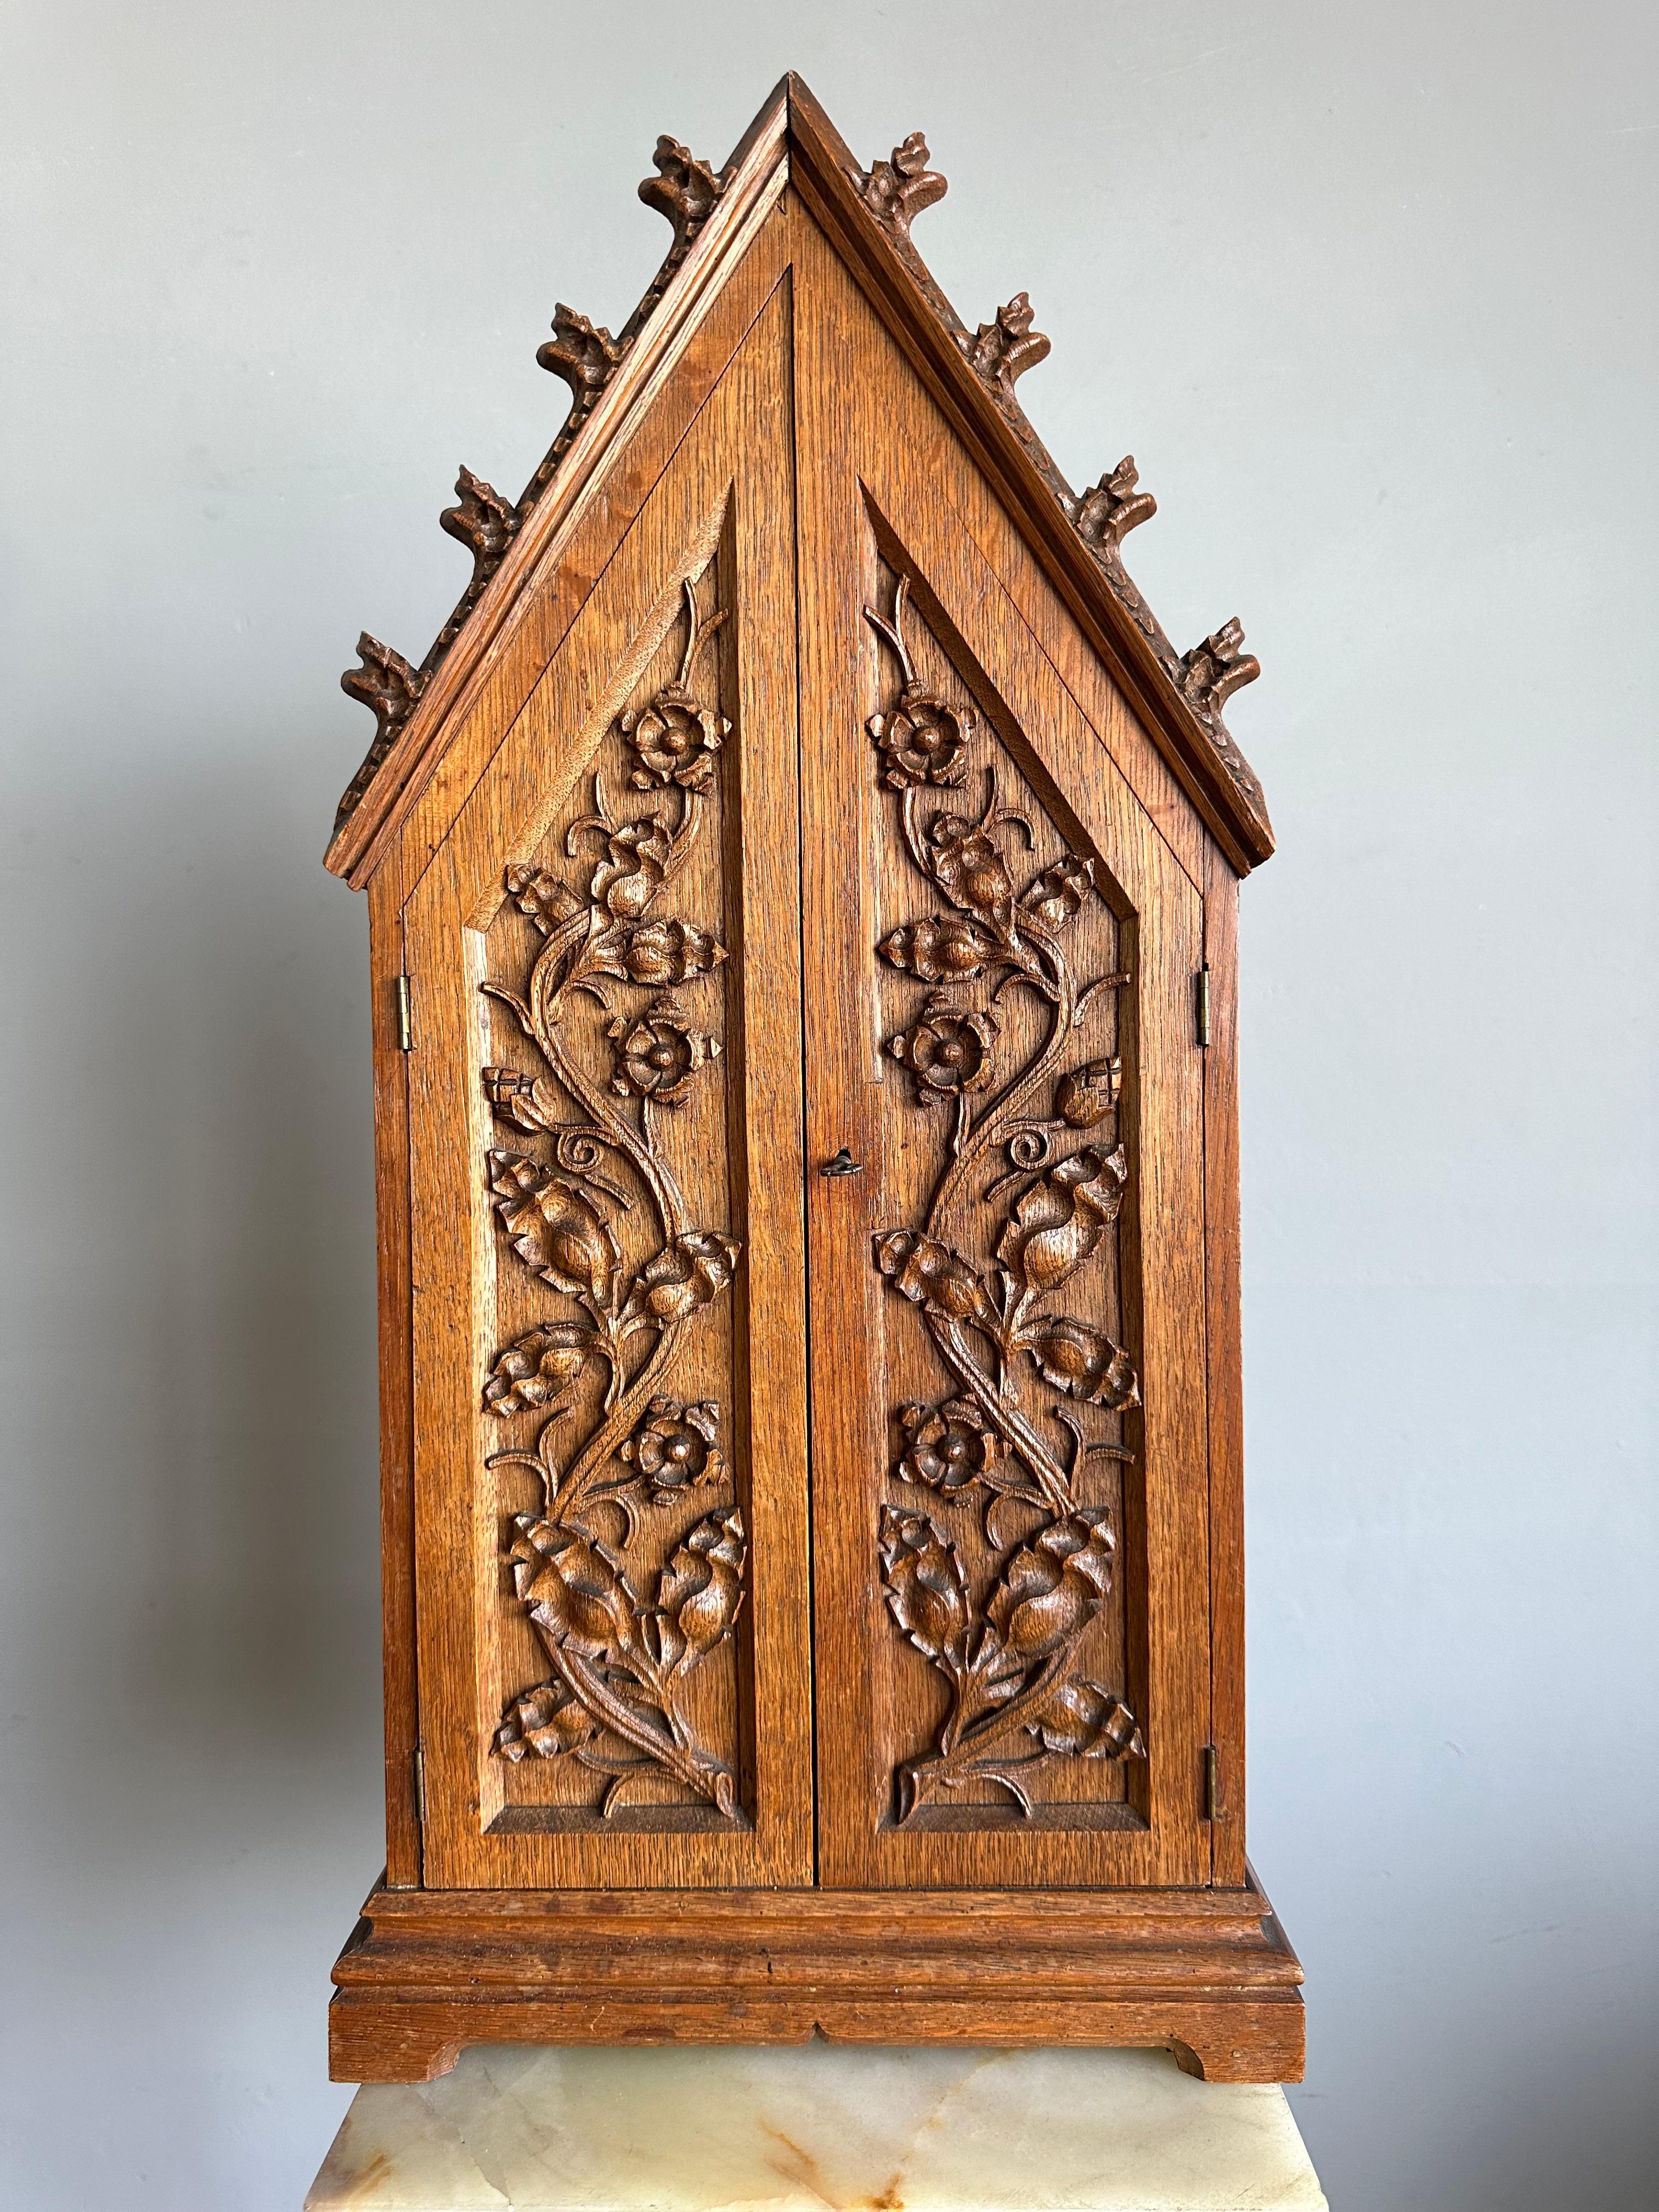 Rare and good condition, Gothic-art shrine for standing or wall-hanging.

This handsome and decorative, Gothic wall shrine is completely hand-crafted out of solid oak and it will look awesome, no matter where you decide to mount or place her. It